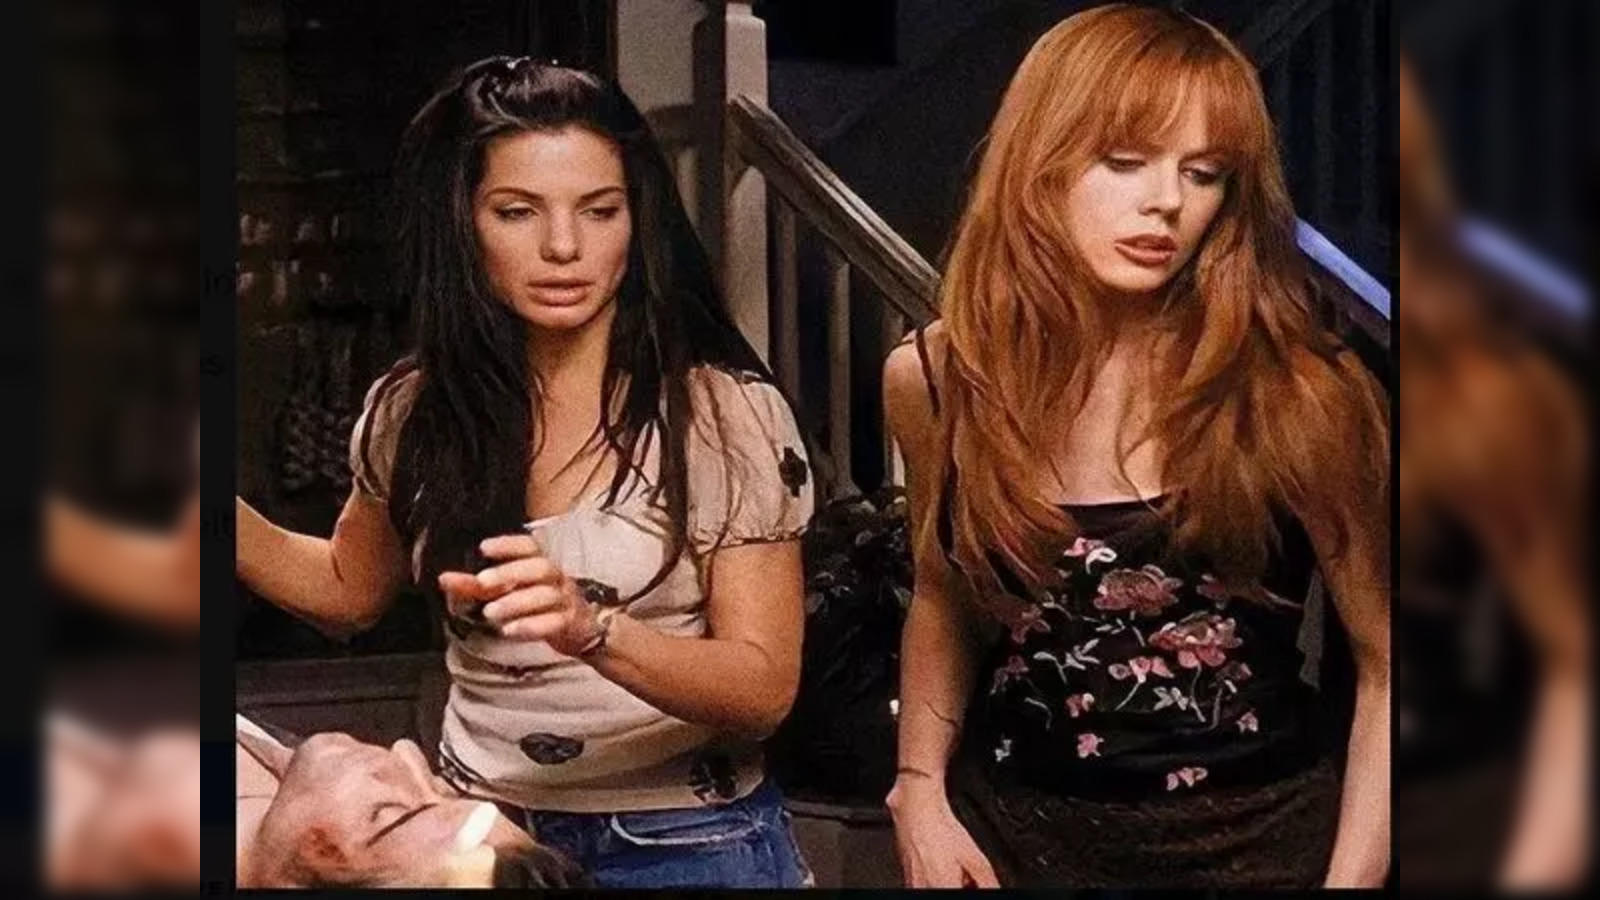 Practical Magic: Practical Magic 2: Will Sandra Bullock and Nicole Kidman  return for sequel? Here's everything we know so far - The Economic Times